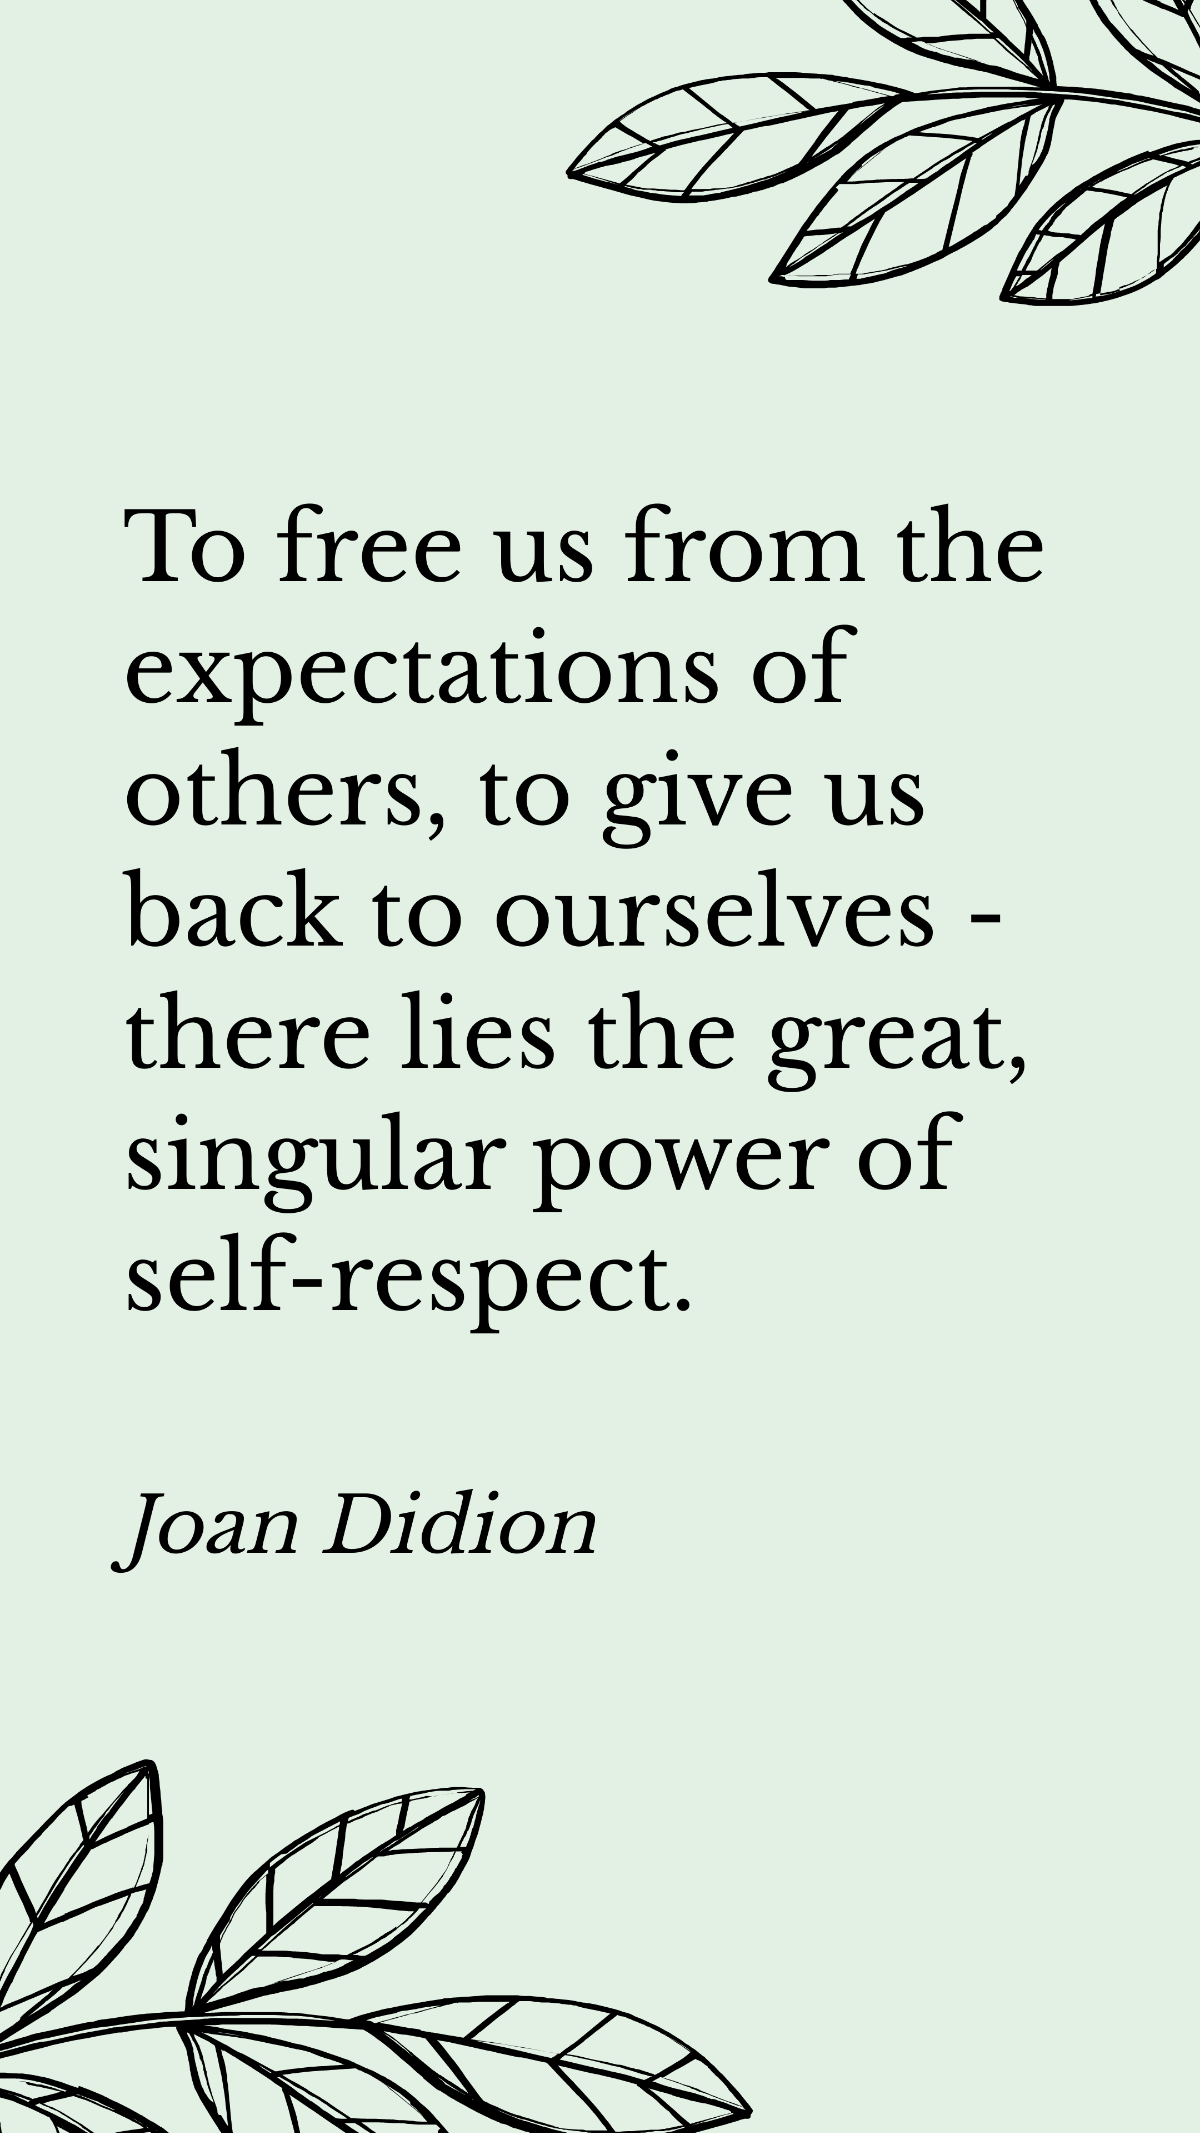 Joan Didion - To us from the expectations of others, to give us back to ourselves - there lies the great, singular power of self-respect. Template